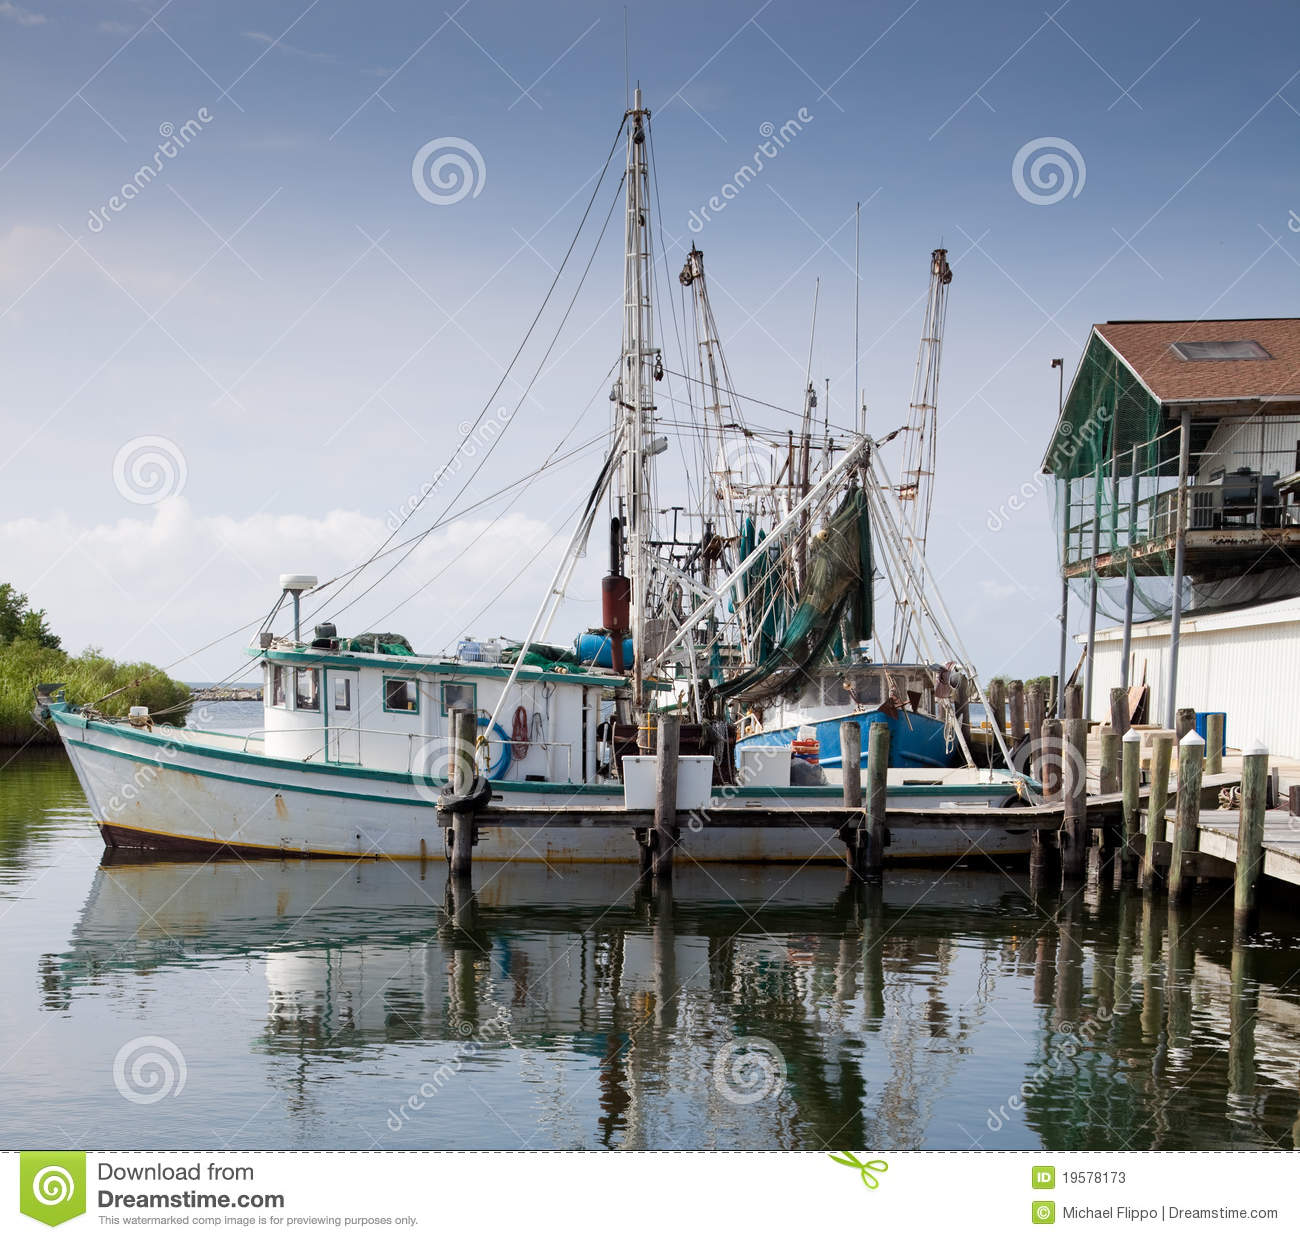 Commercial Fishing Boat In Marina Stock Photos   Image  19578173